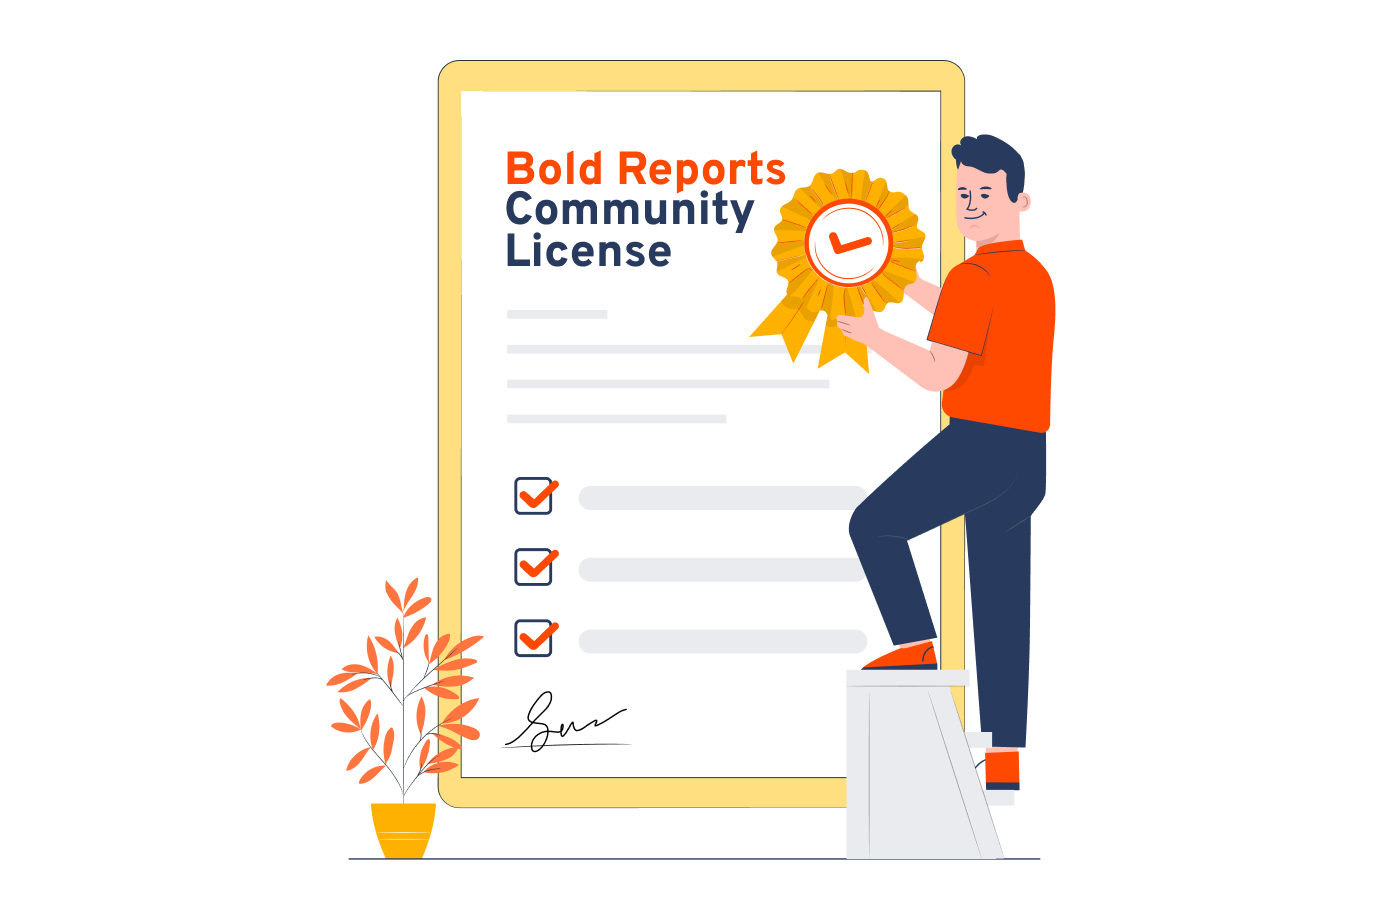 What is Bold Reports Community License